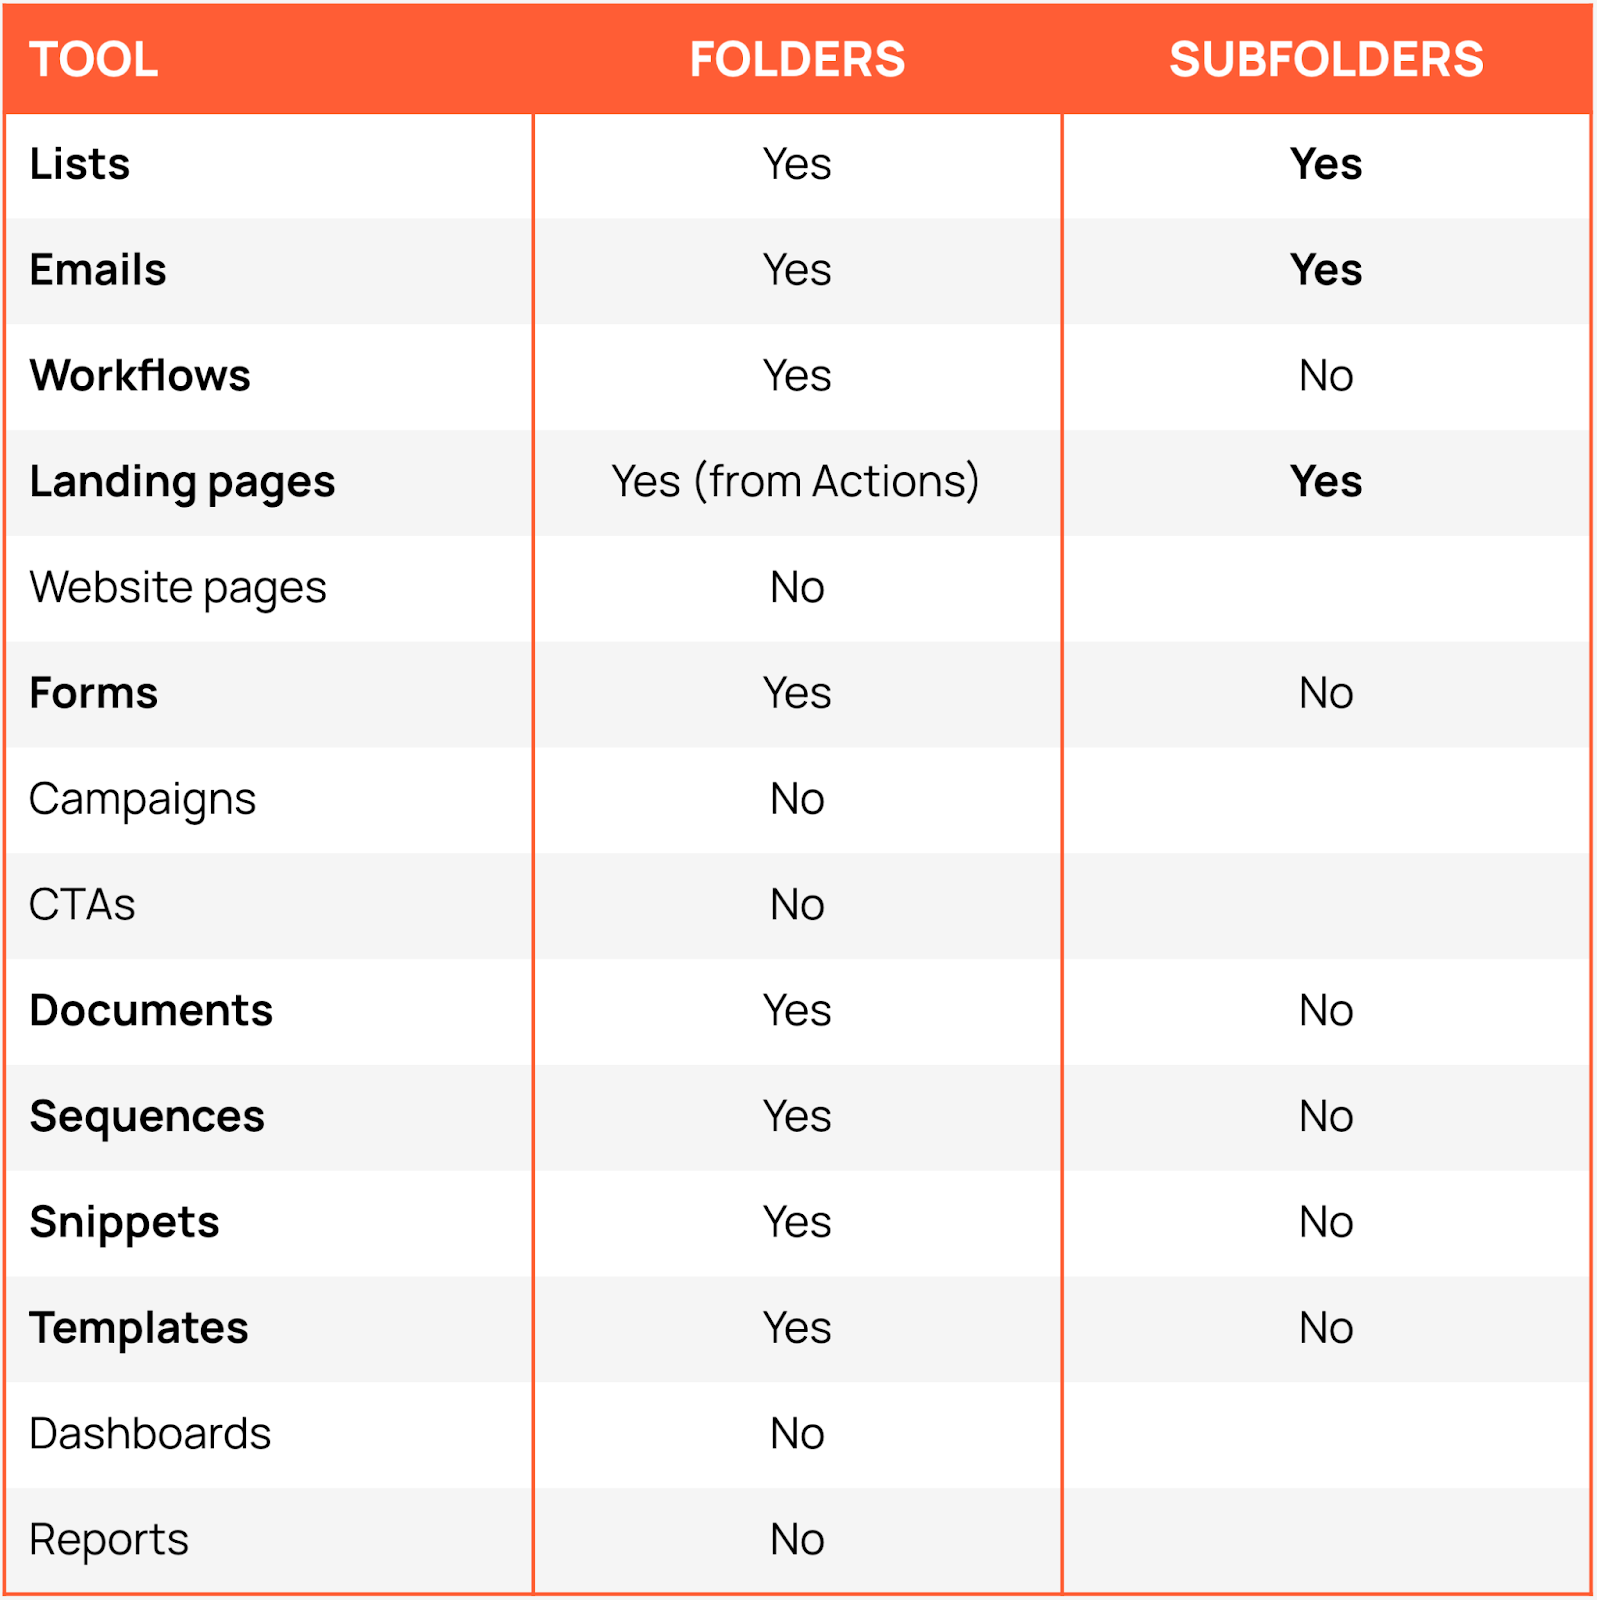 Which HubSpot Tools have folders and subfolders